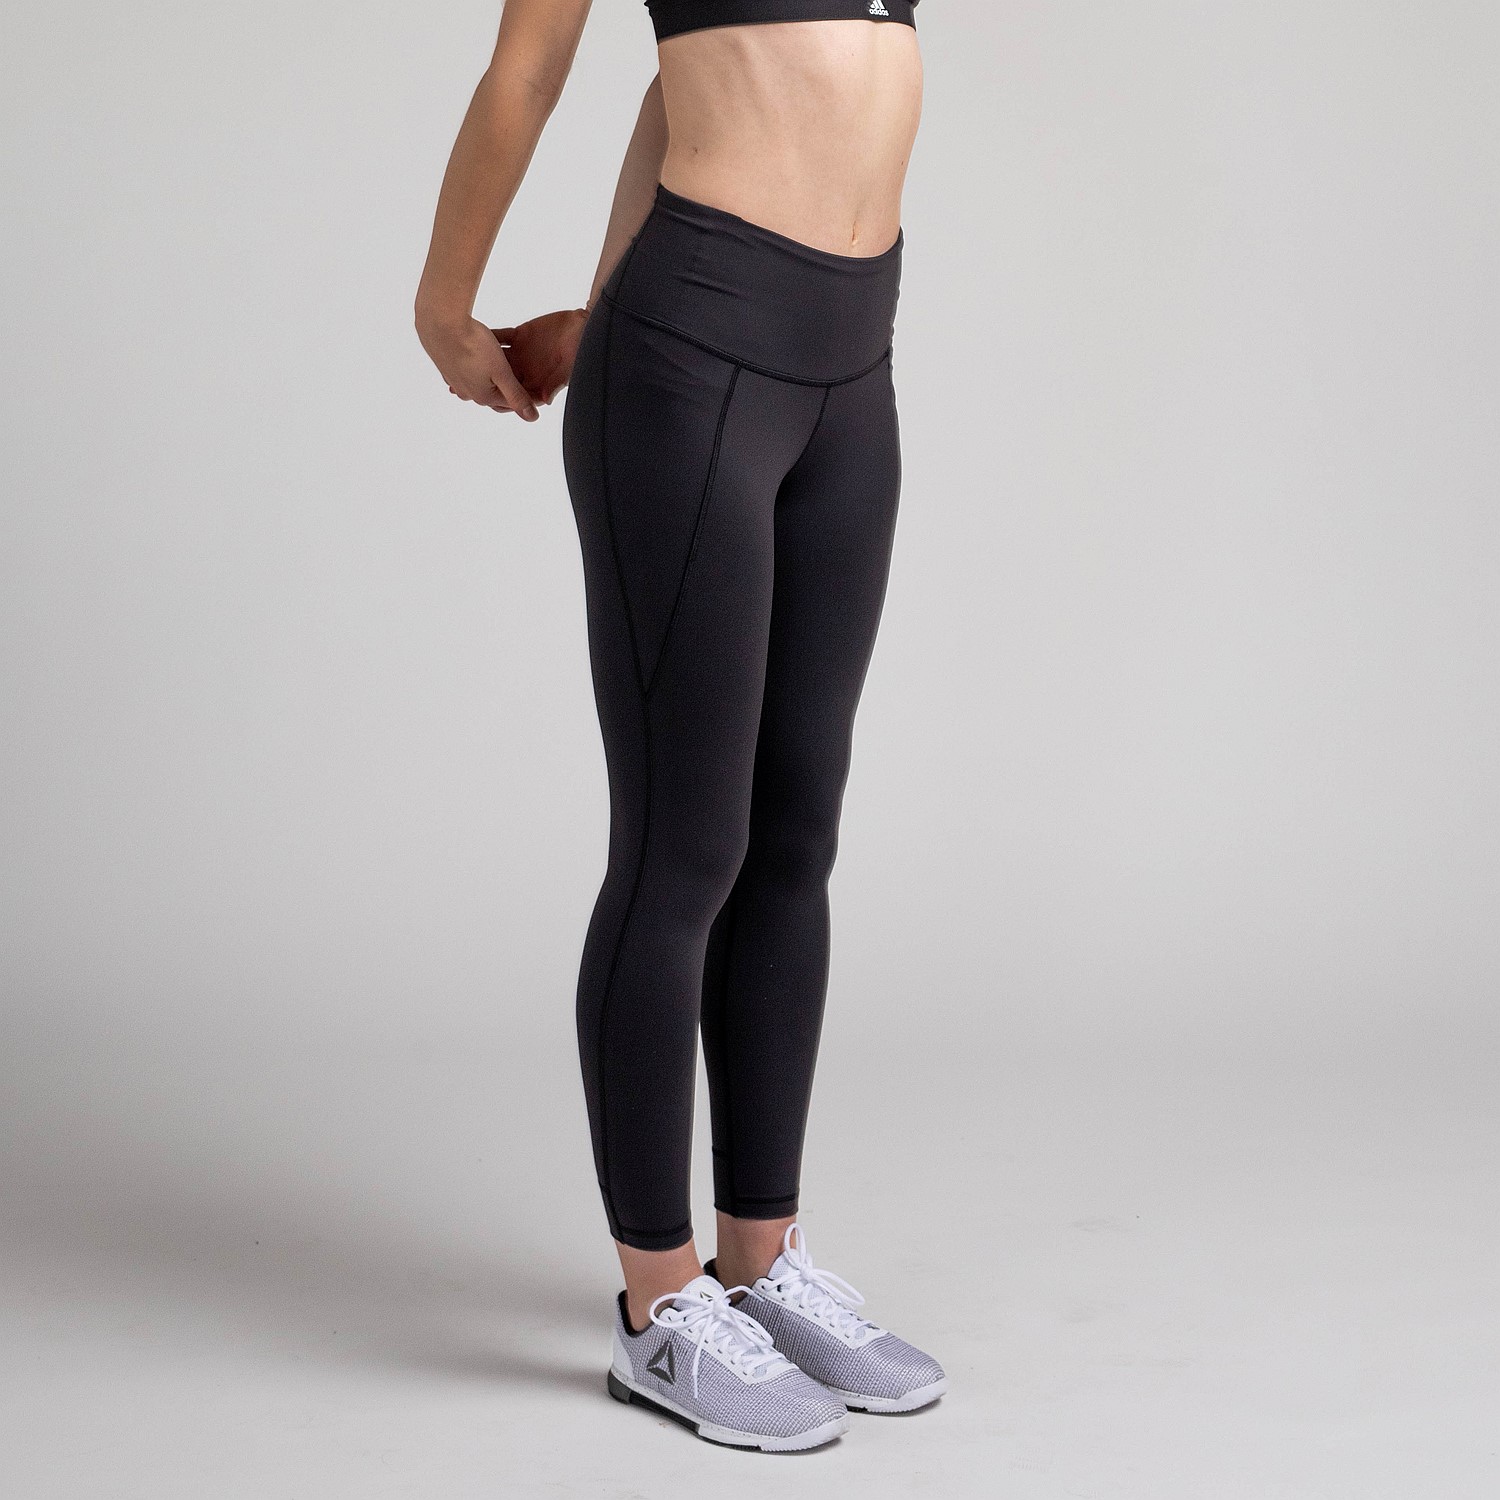 reebok lux tights review